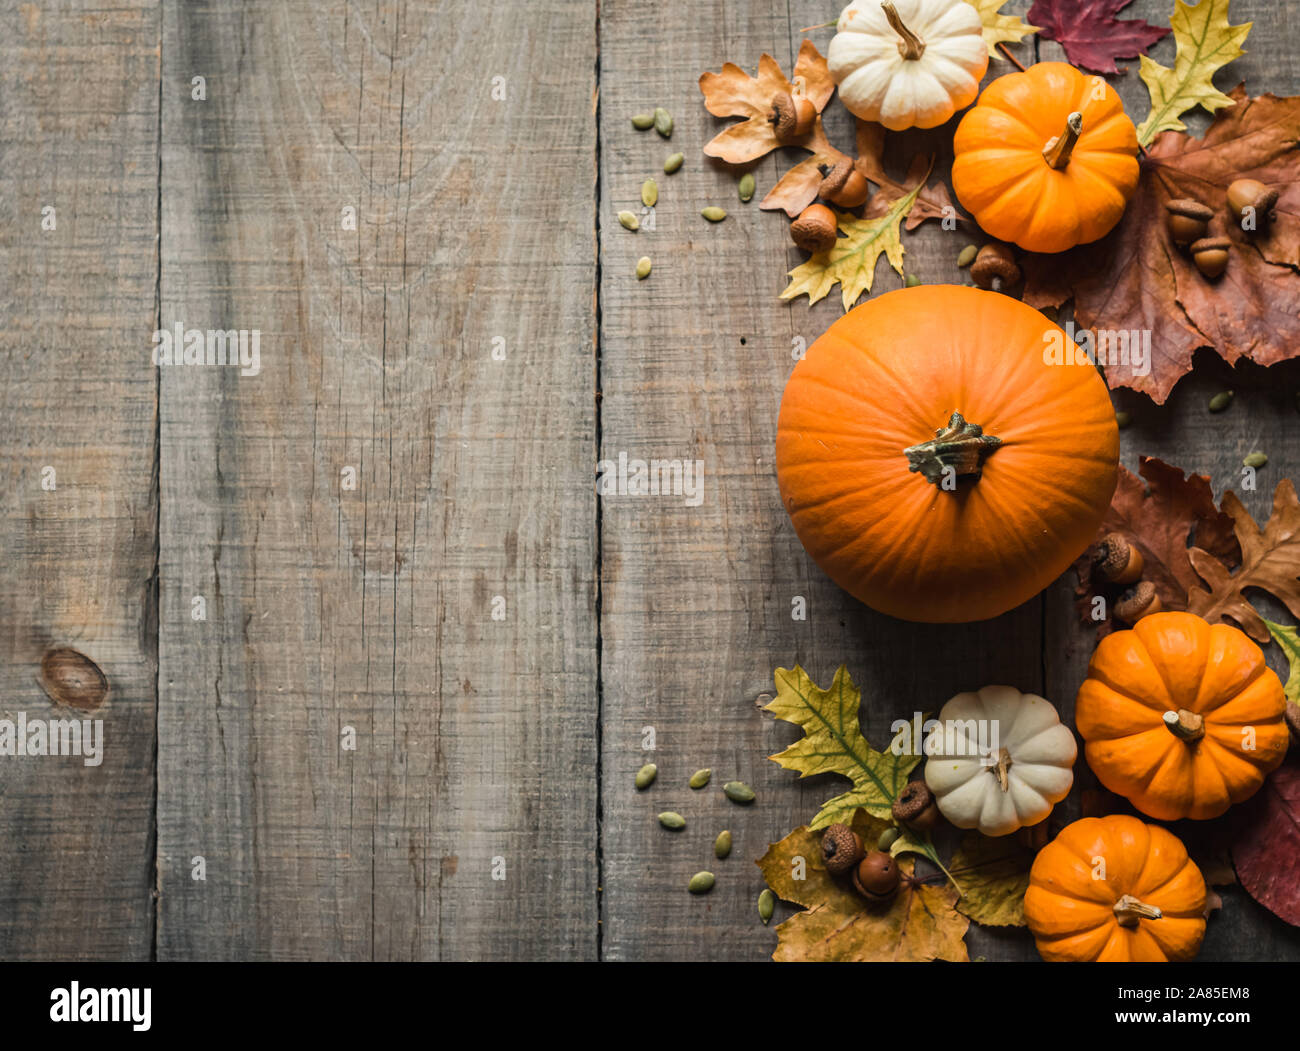 Overhead view of pumpkins and other fall decor on rustic wooden table. Stock Photo